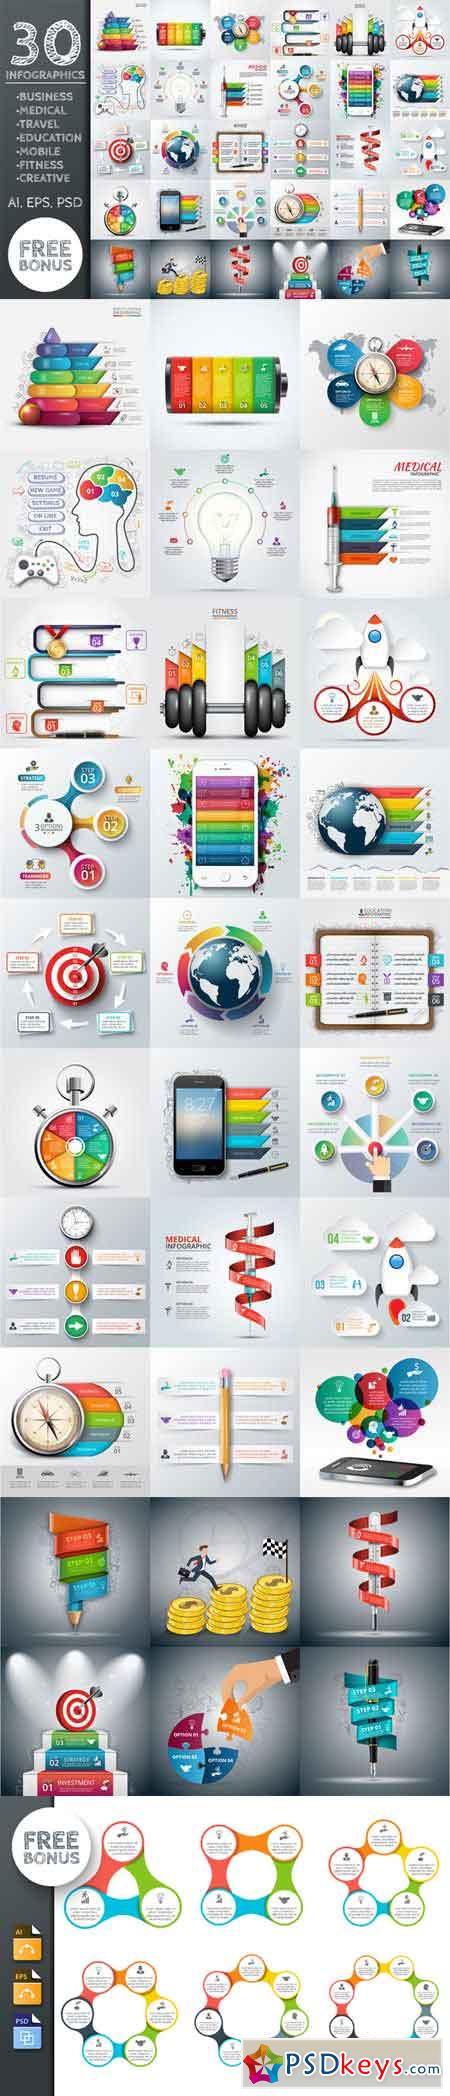 30 business infographic templates 520231